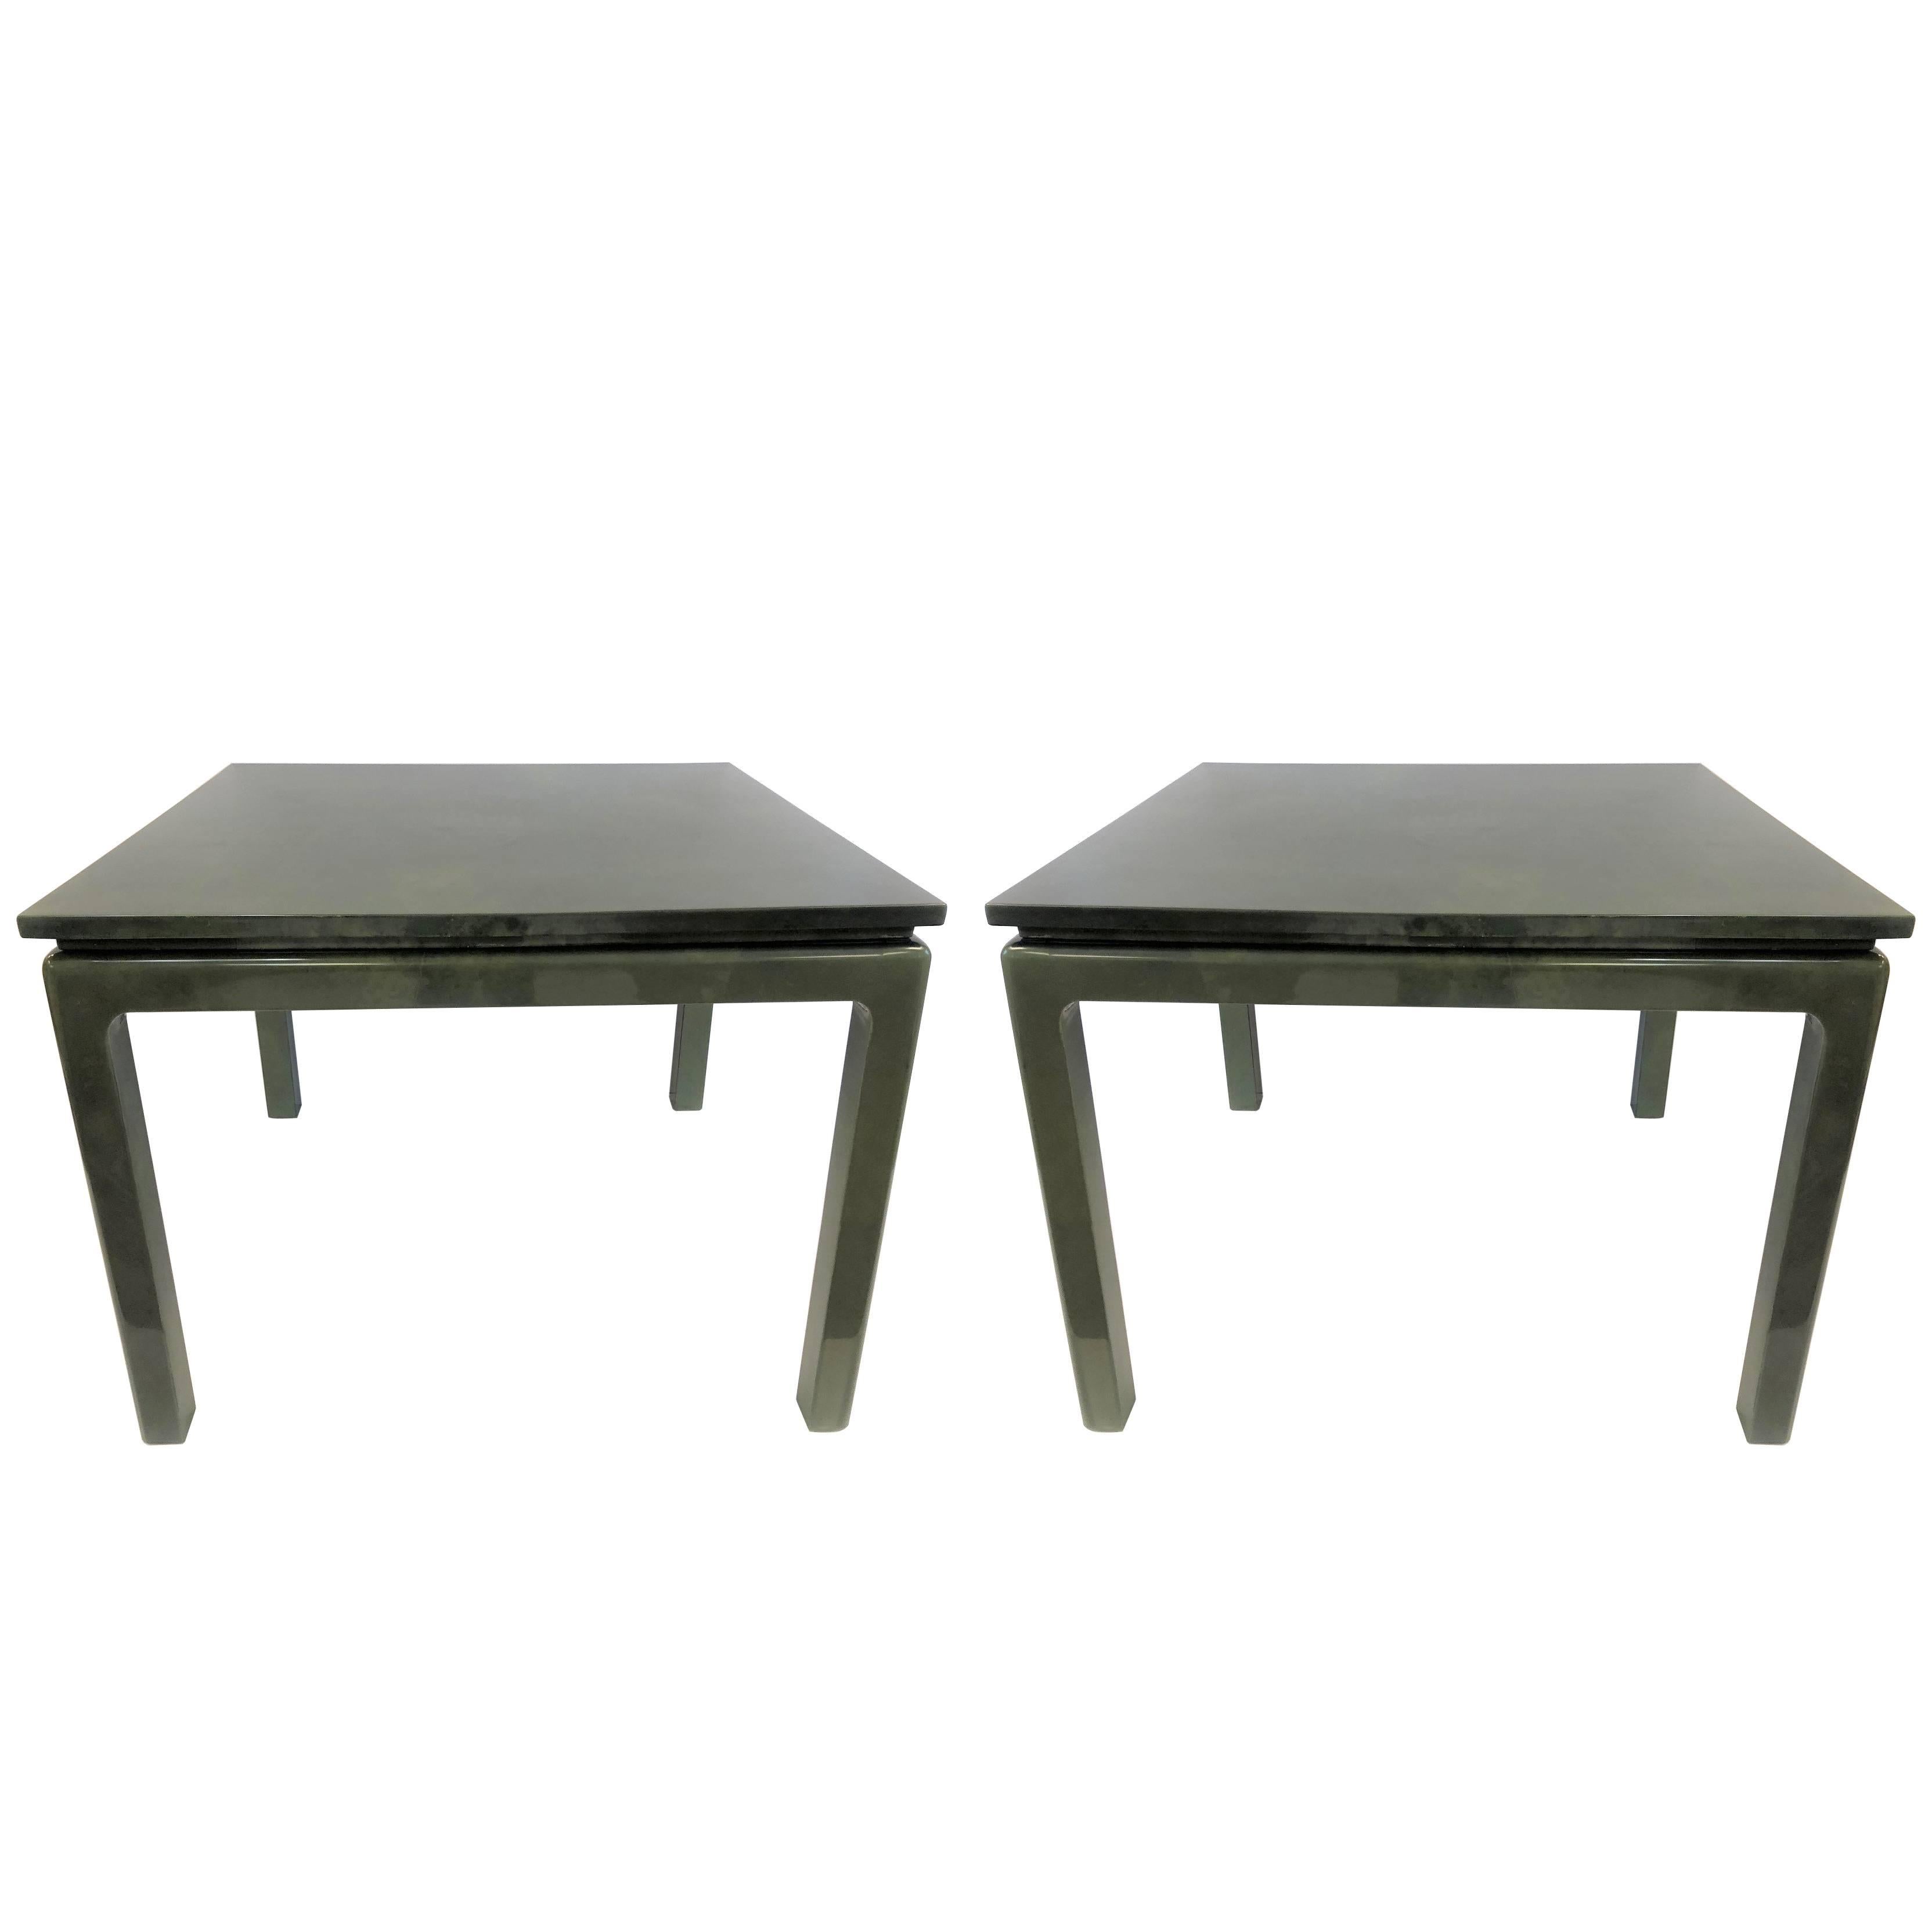 Pair of Jimeco ltda lacquered goatskin game tables in green. Karl Springer style.